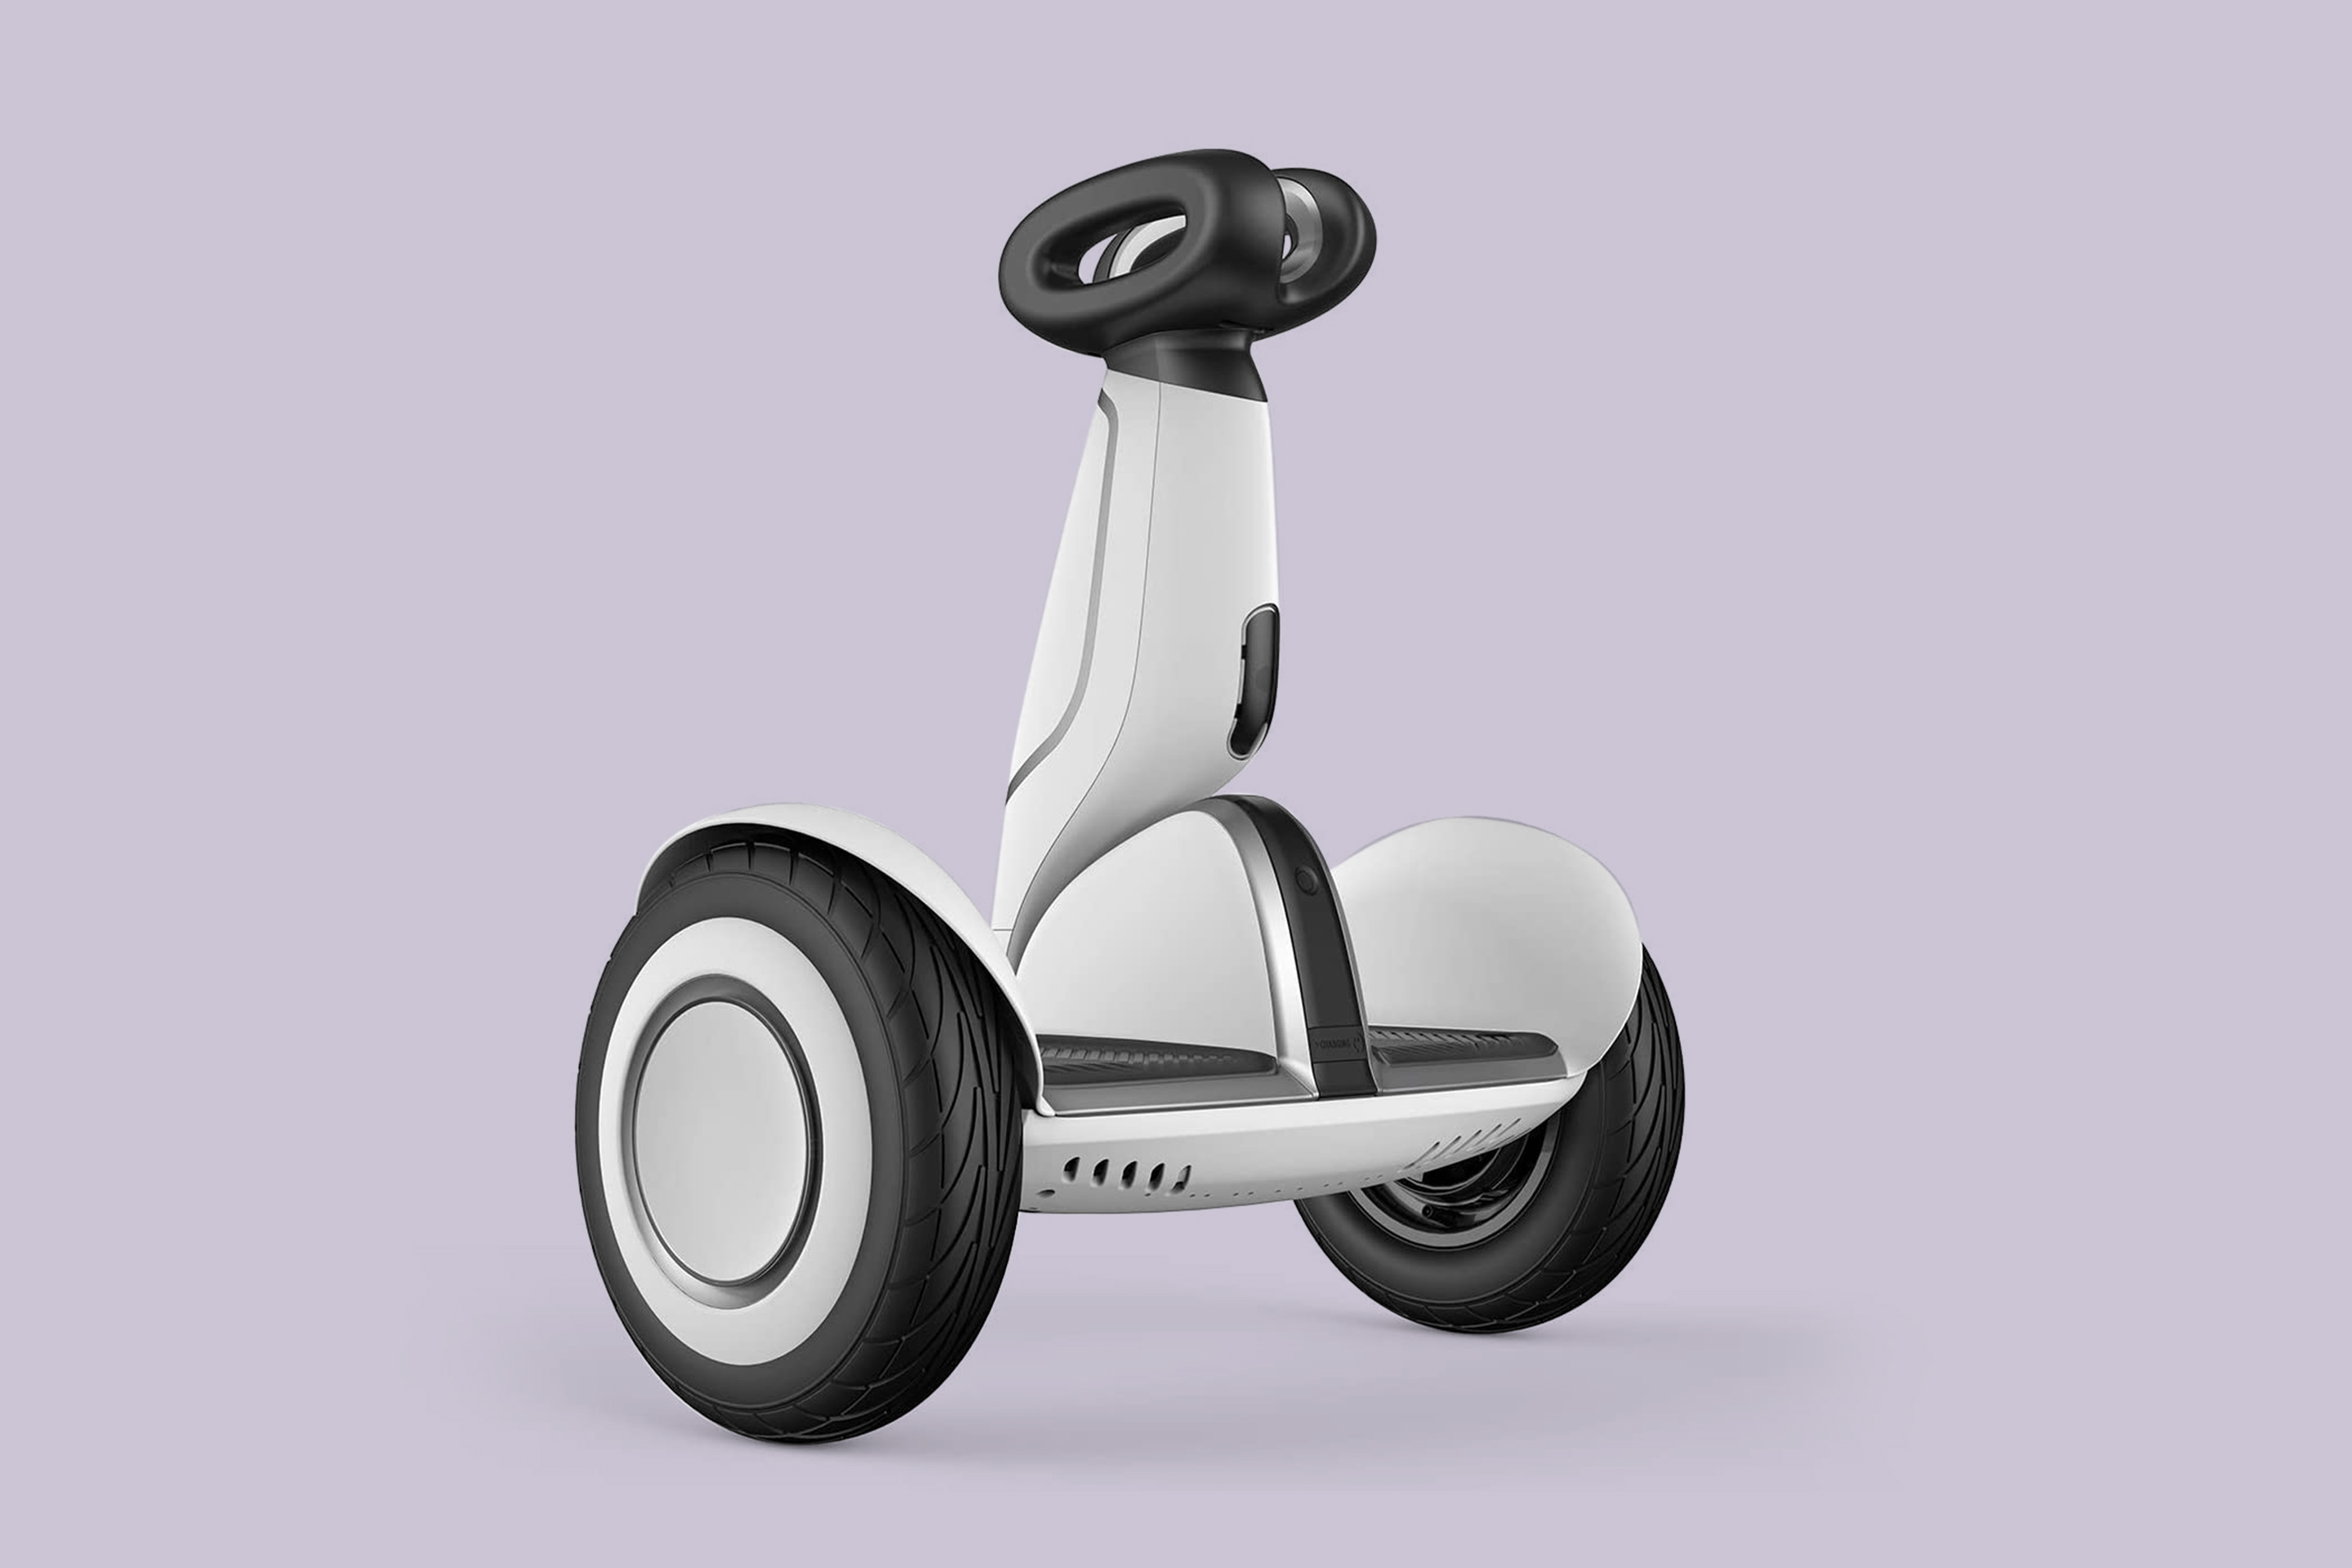 Prime Day Just Added Great Deals on Electric Scooters, Hoverboards and Segways